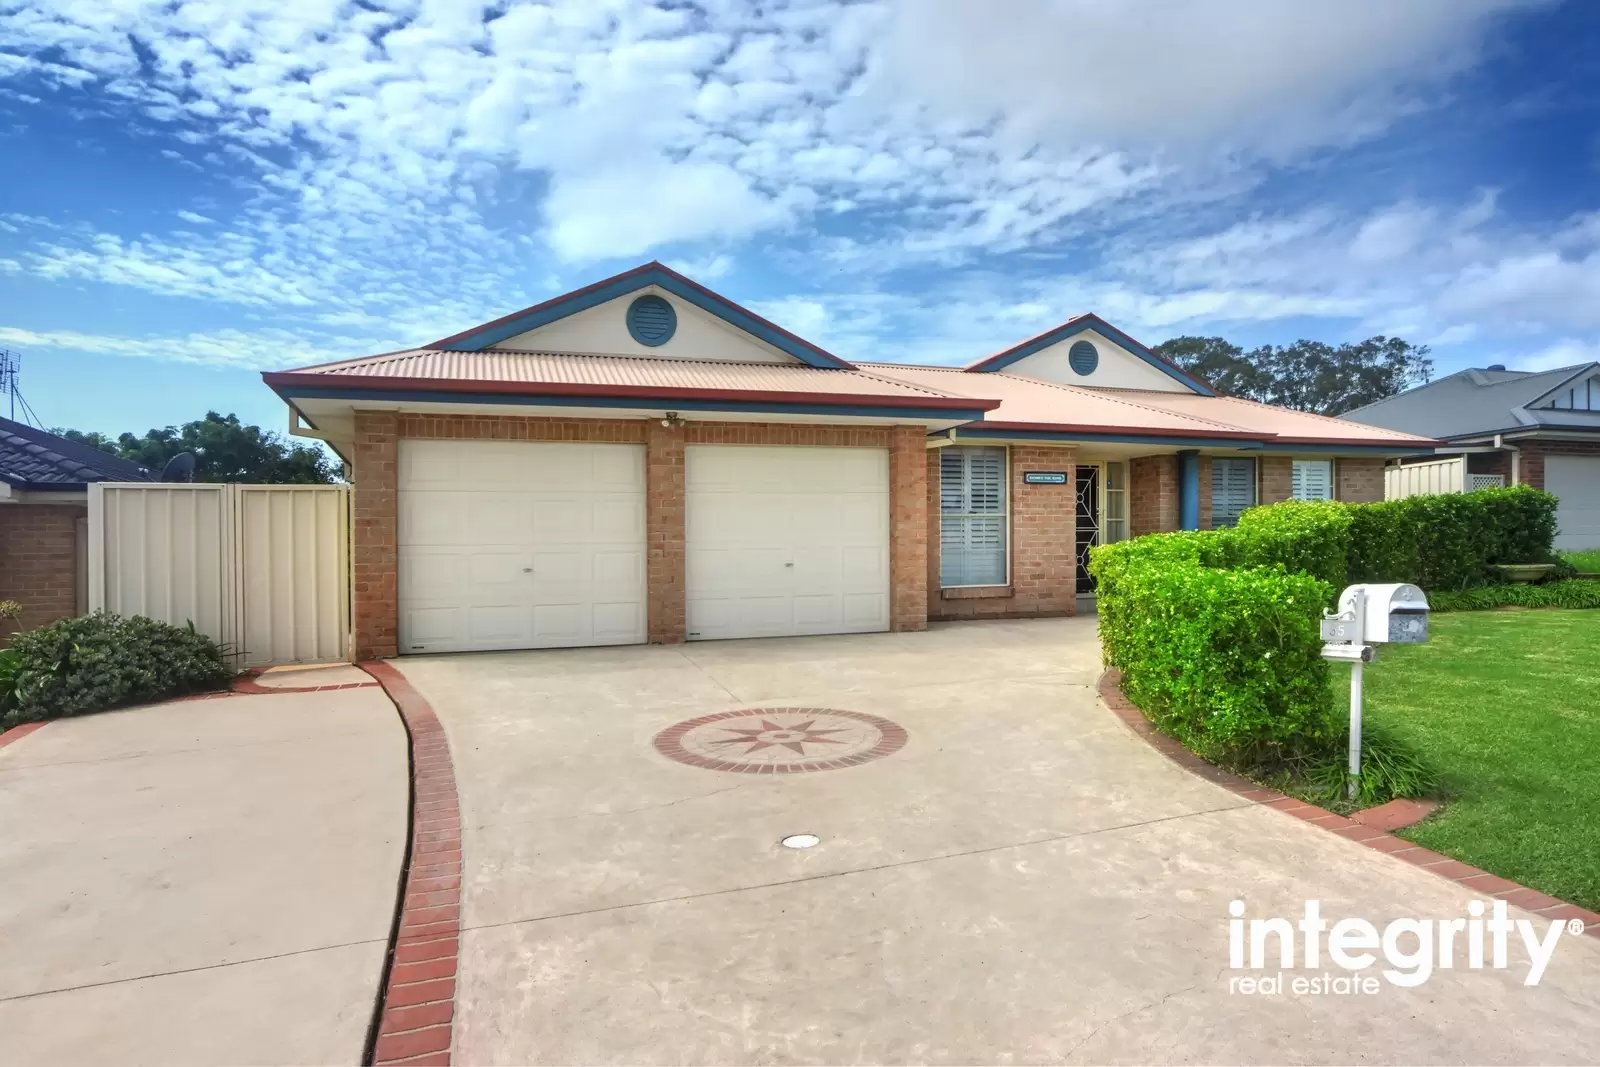 55 Burradoo Crescent, Nowra Sold by Integrity Real Estate - image 1